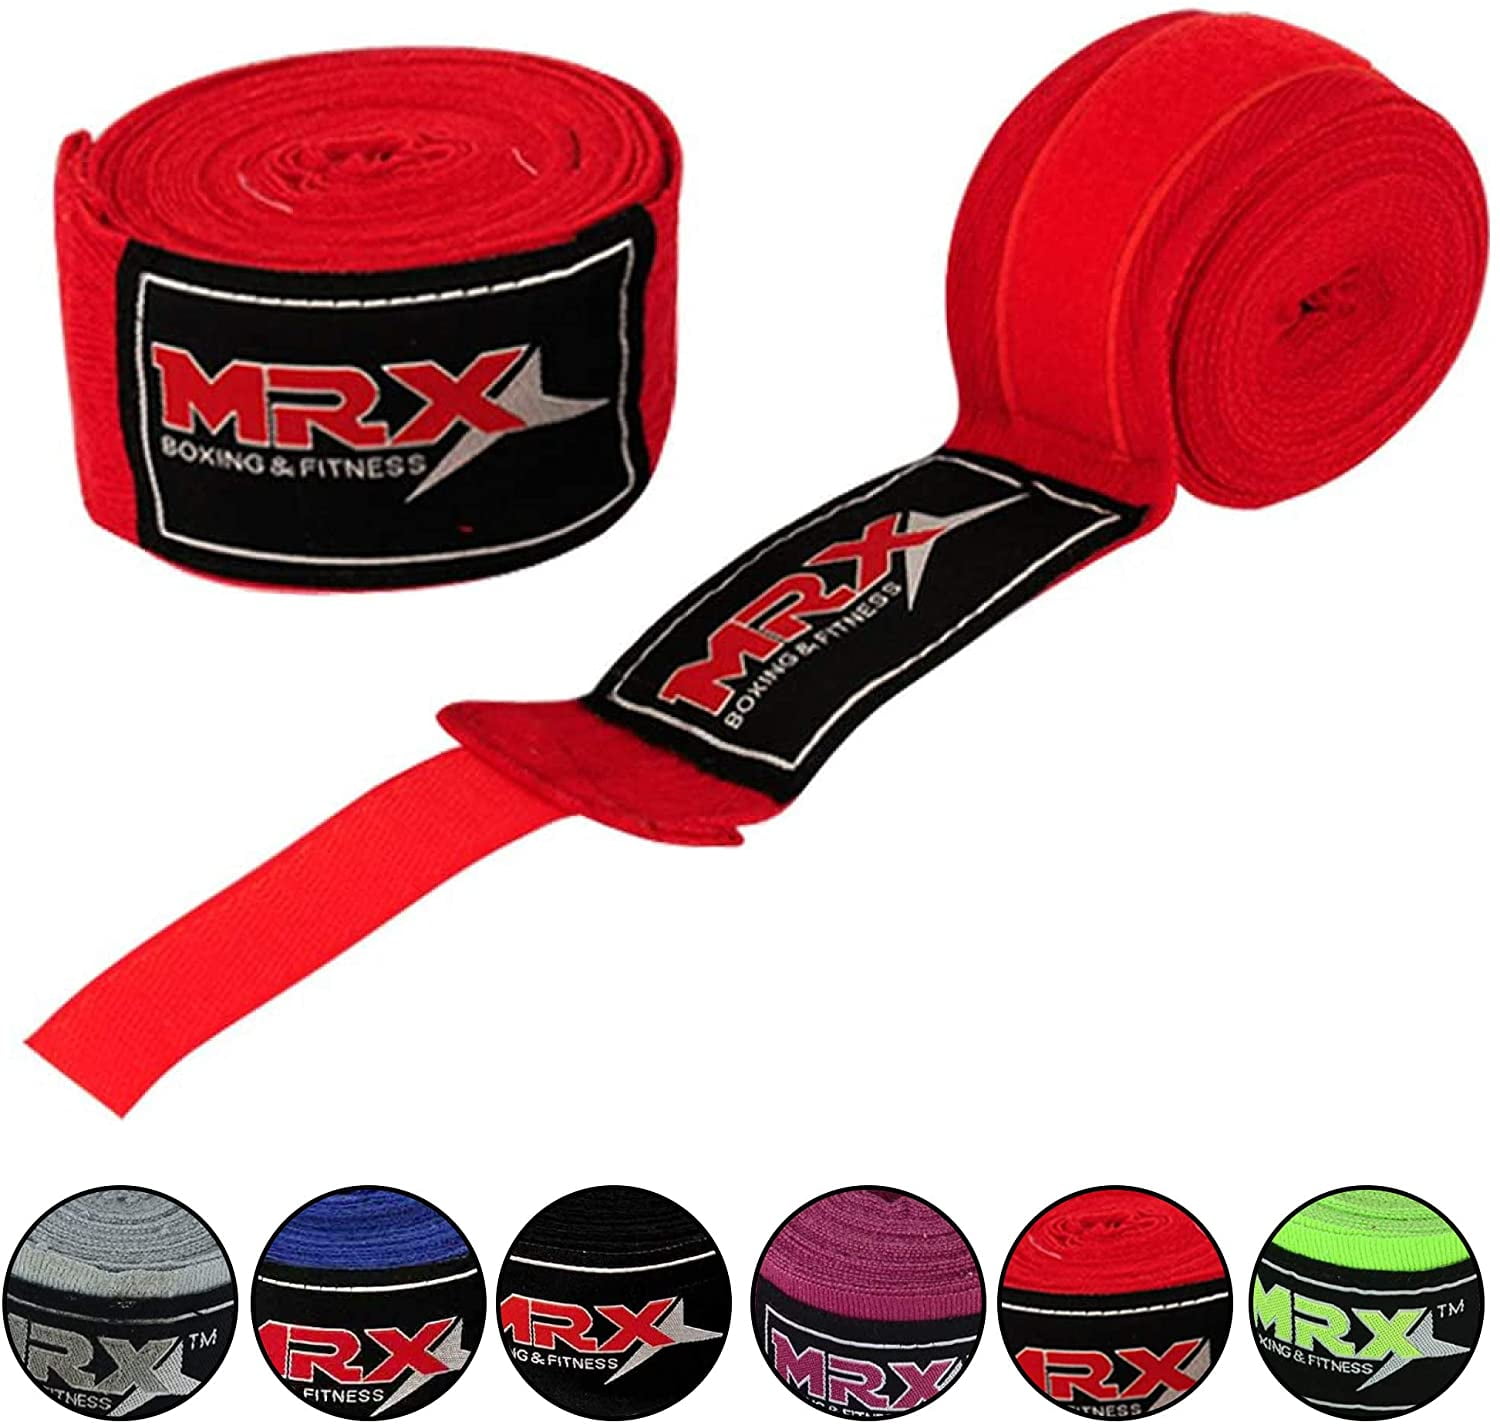 Details about   Boxing Strike Shield Muay Thai Pads for Kicking for MMA Training Sold as 1 piece 